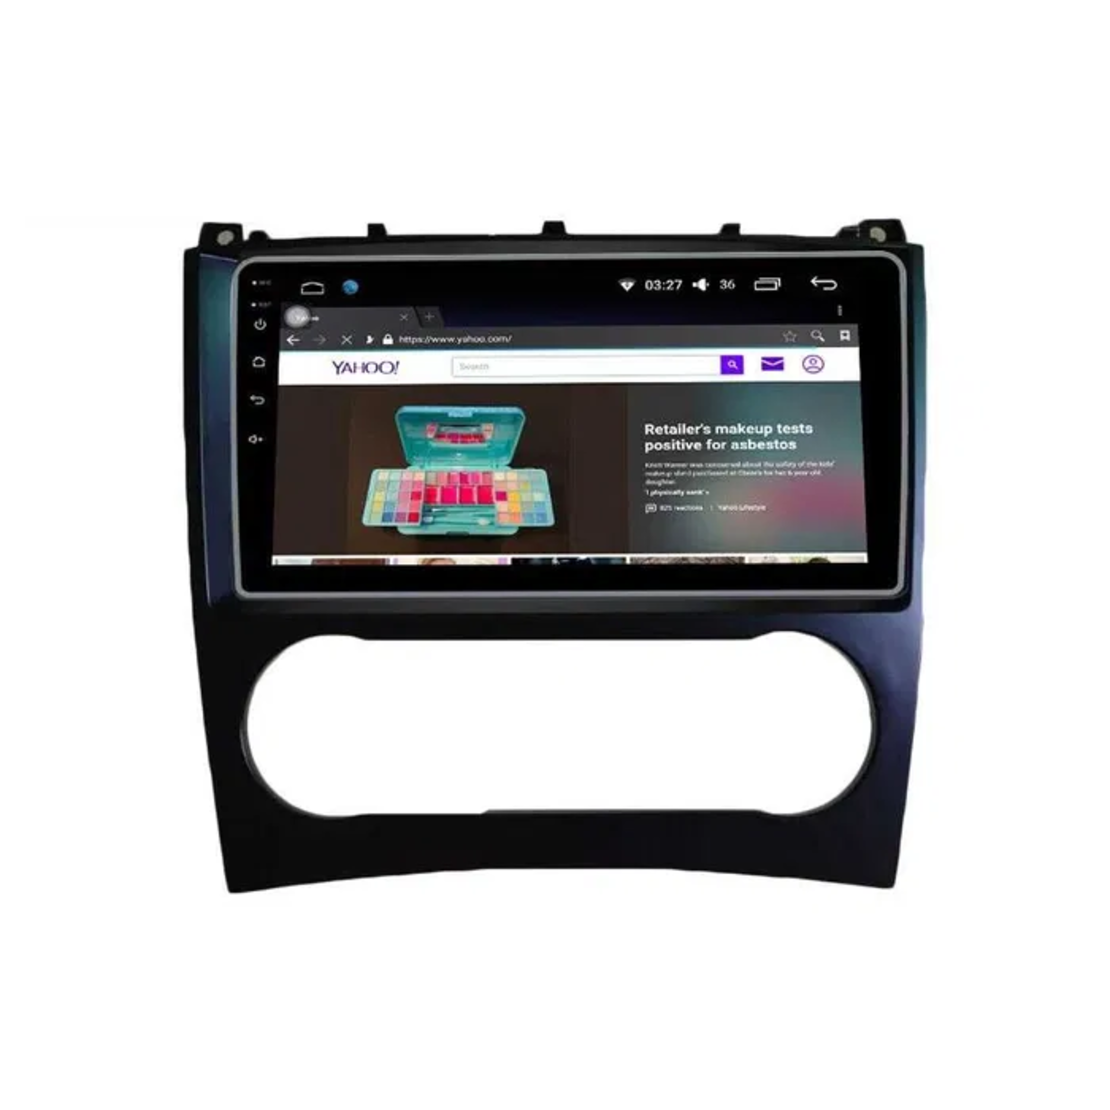 Mercedes Benz C-class W203 2004-2007 Android Multimedia/Navigation